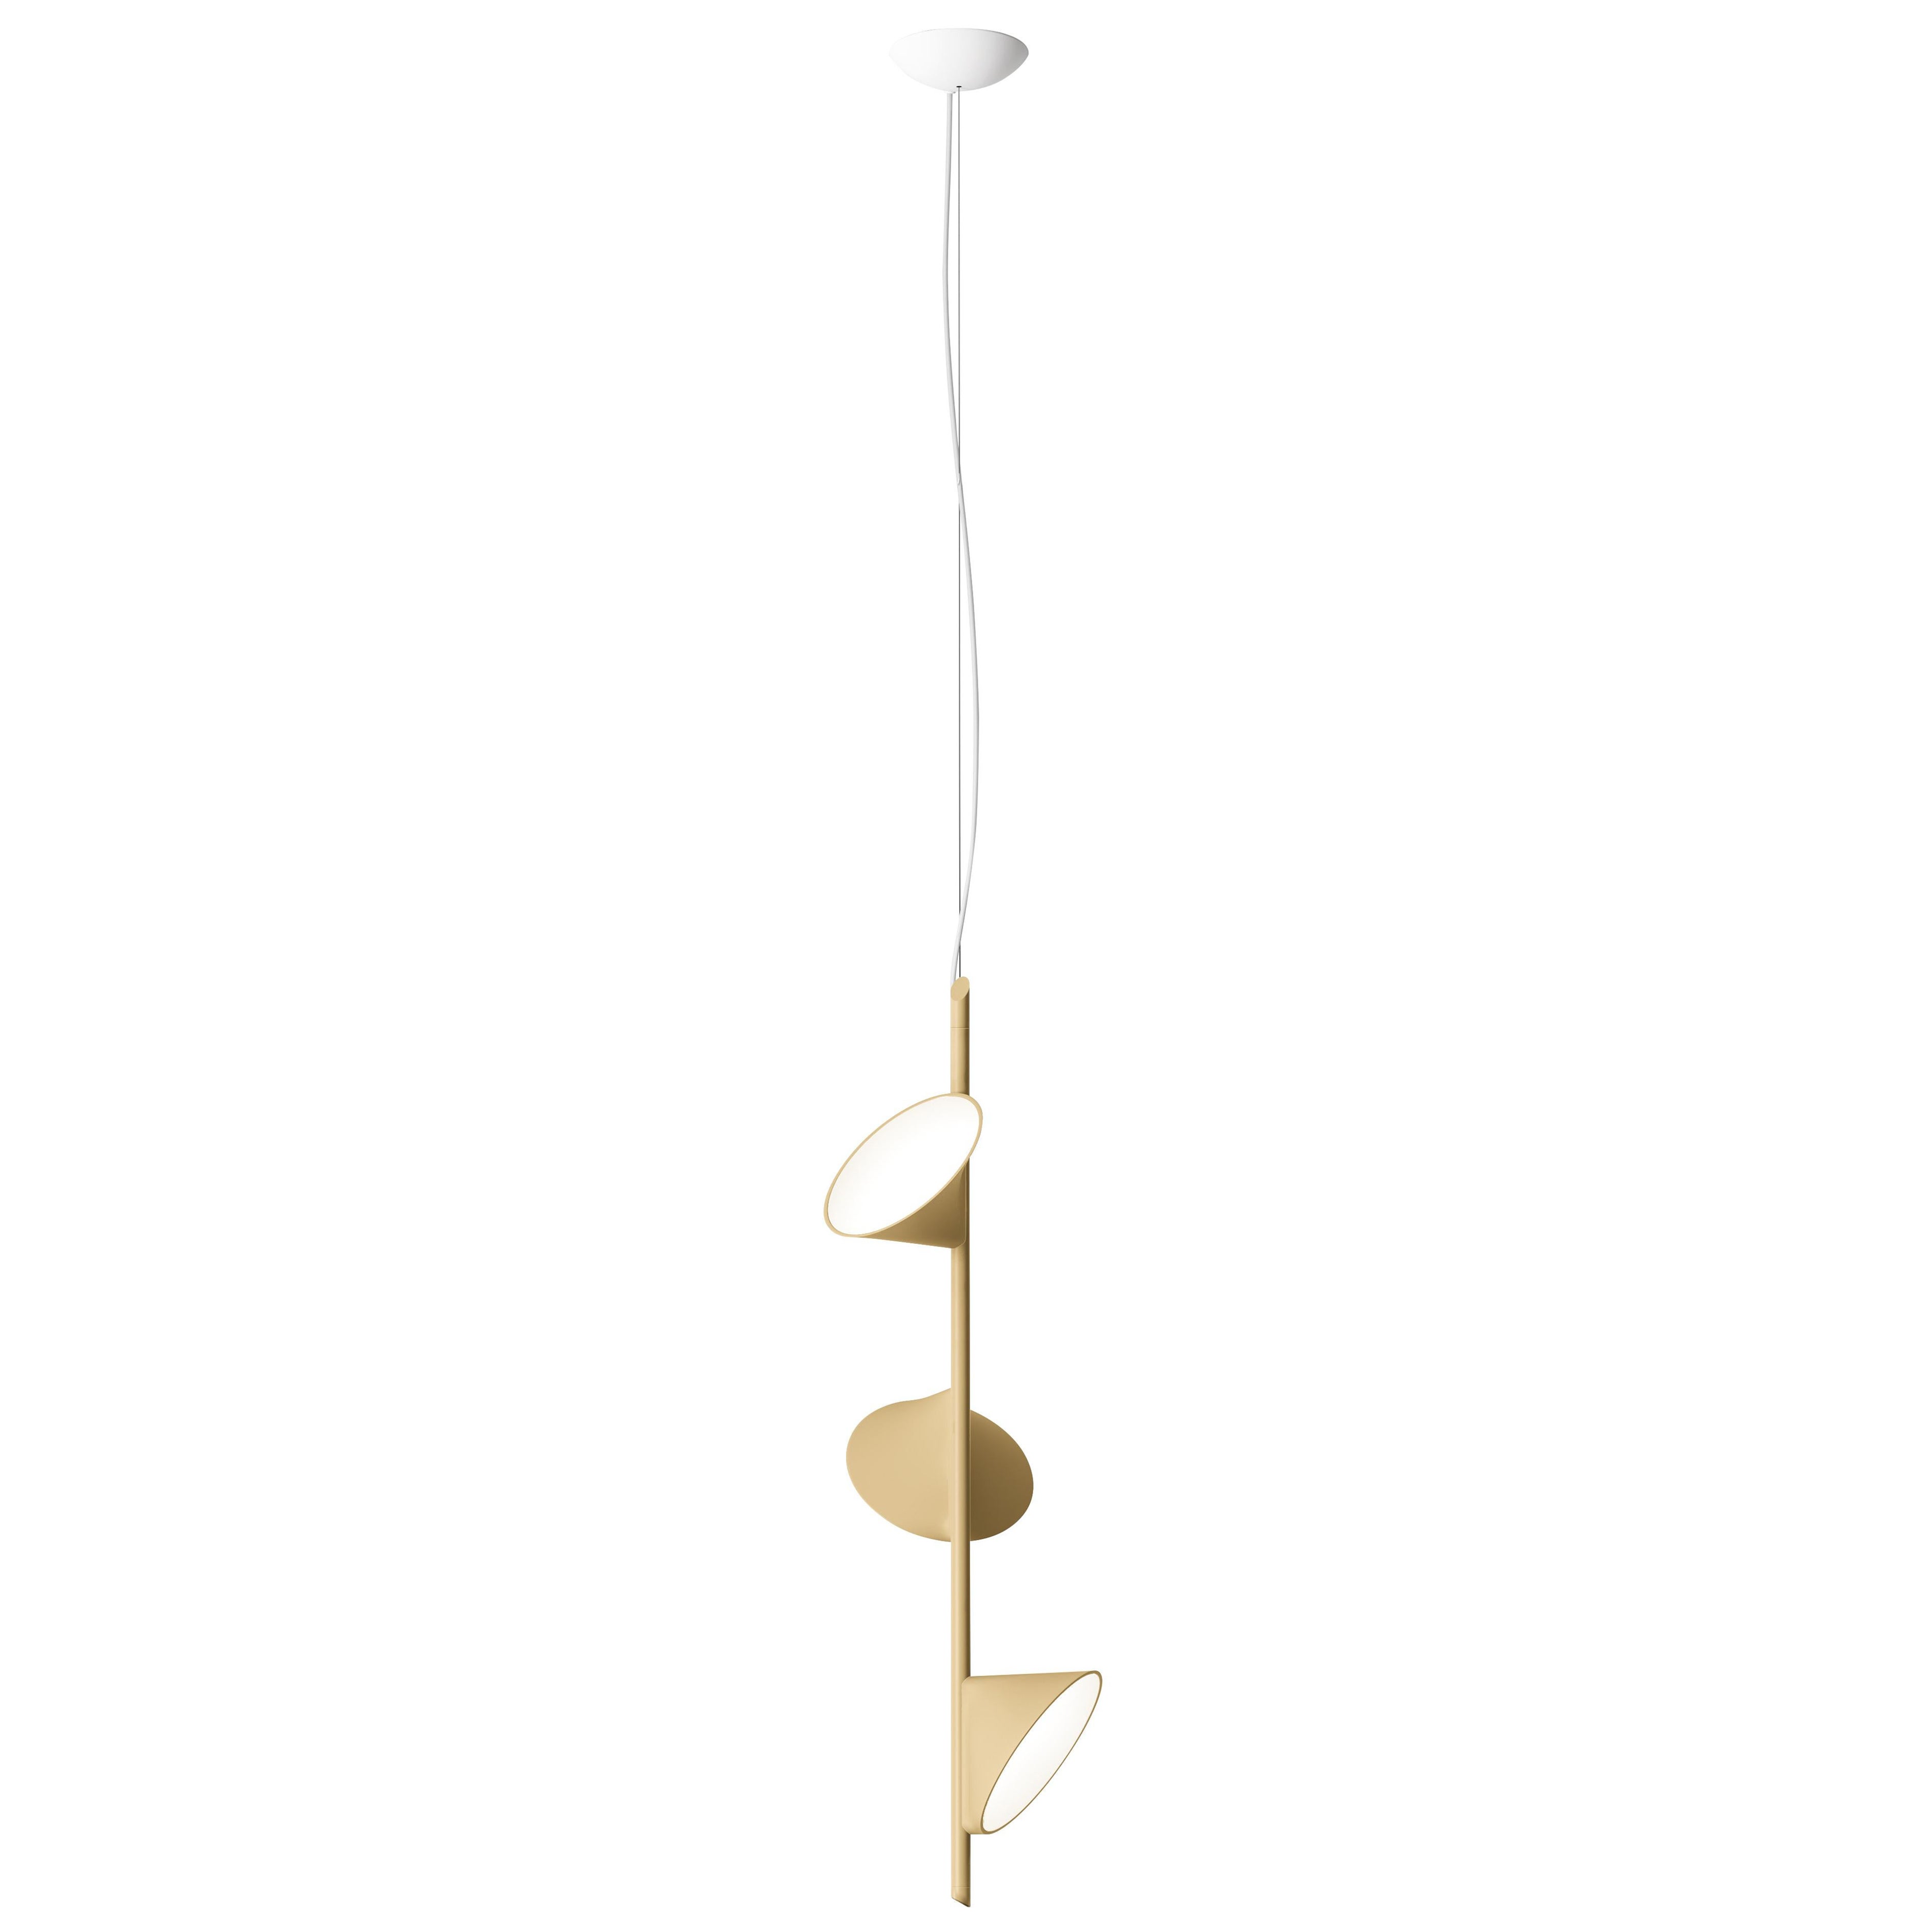 Axolight Orchid 3 Light Pendant Lamp with Aluminum Body in Sand by Rainer Mutsch